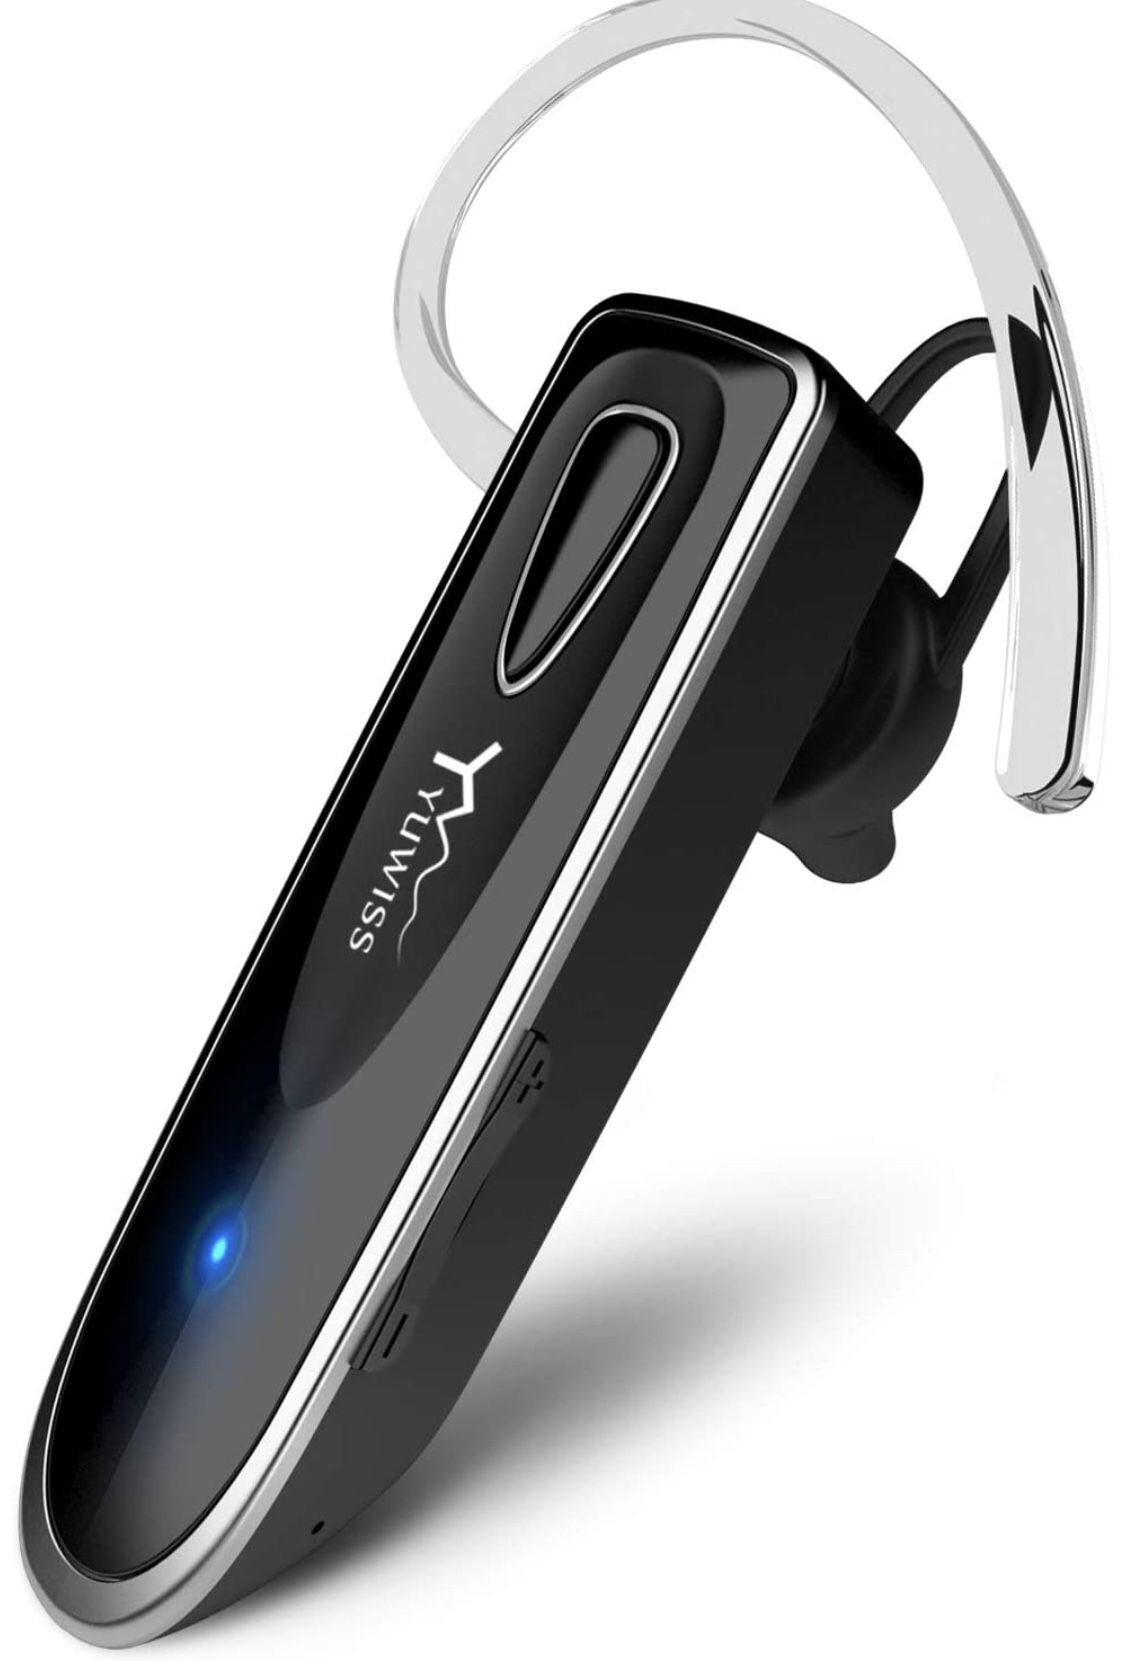 Bluetooth Earpiece for Cell Phone